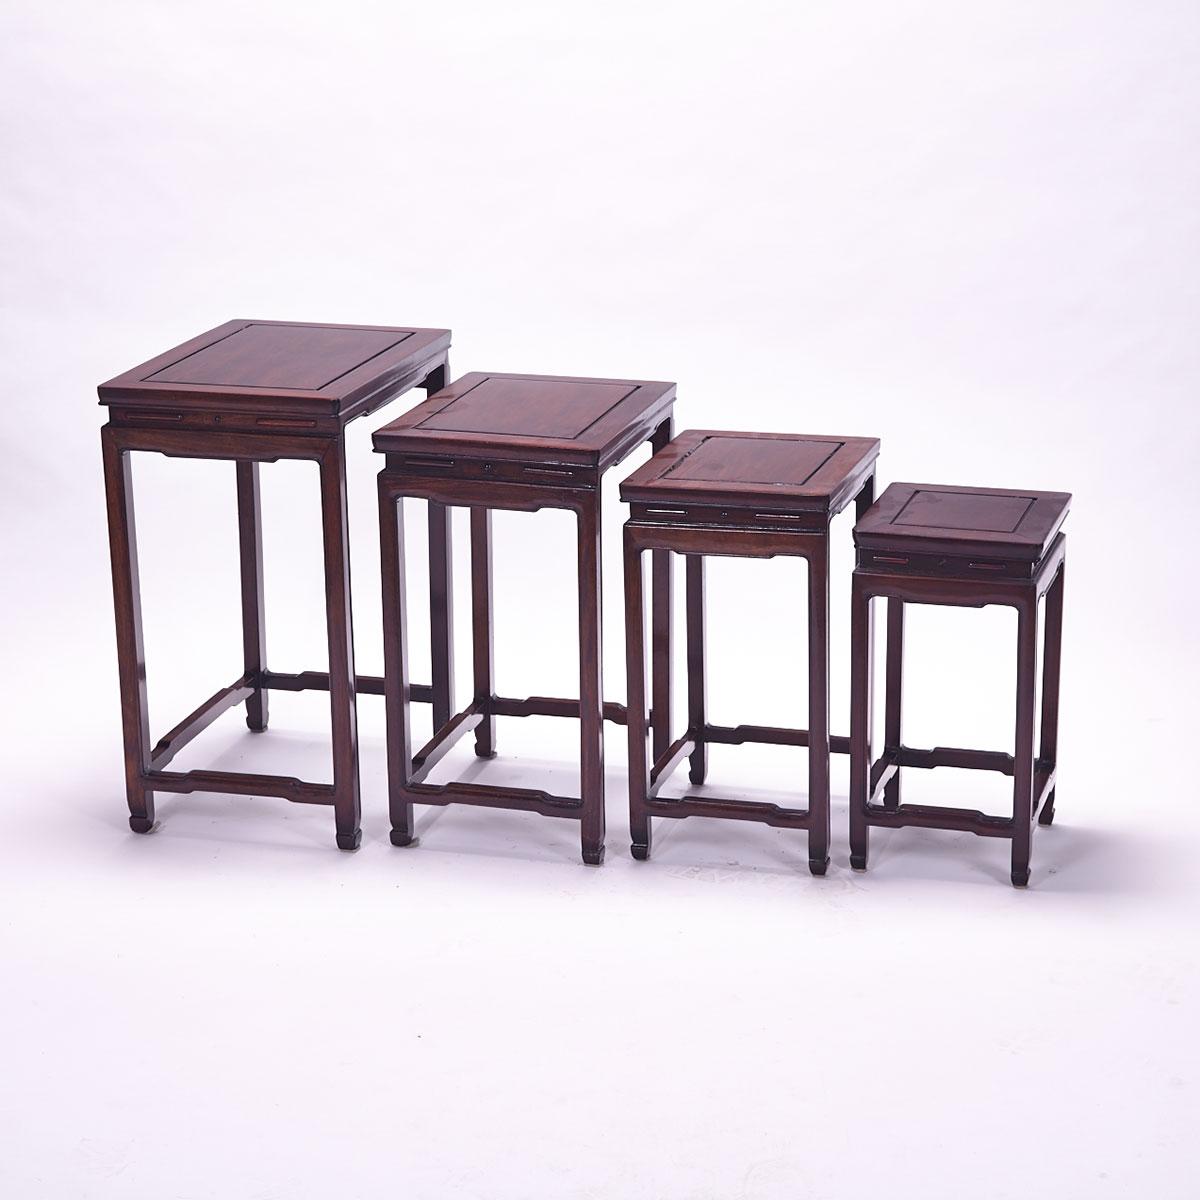 Rosewood Four-Piece Nesting Table, Republican Period